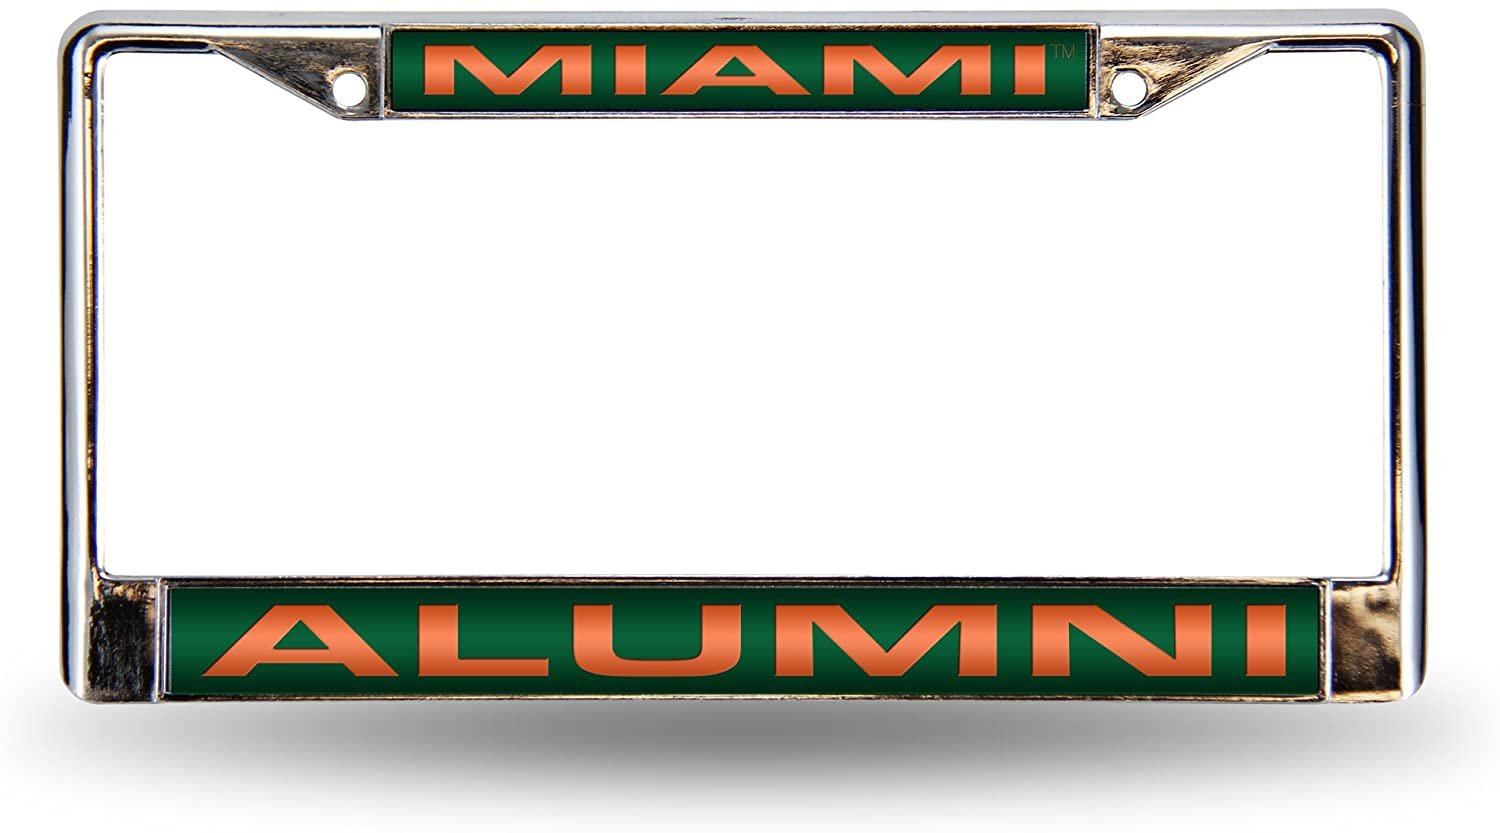 University Miami Hurricanes Alumni Chrome Metal License Plate Frame Tag Cover, Laser Acrylic Mirrored Inserts, 12x6 Inch